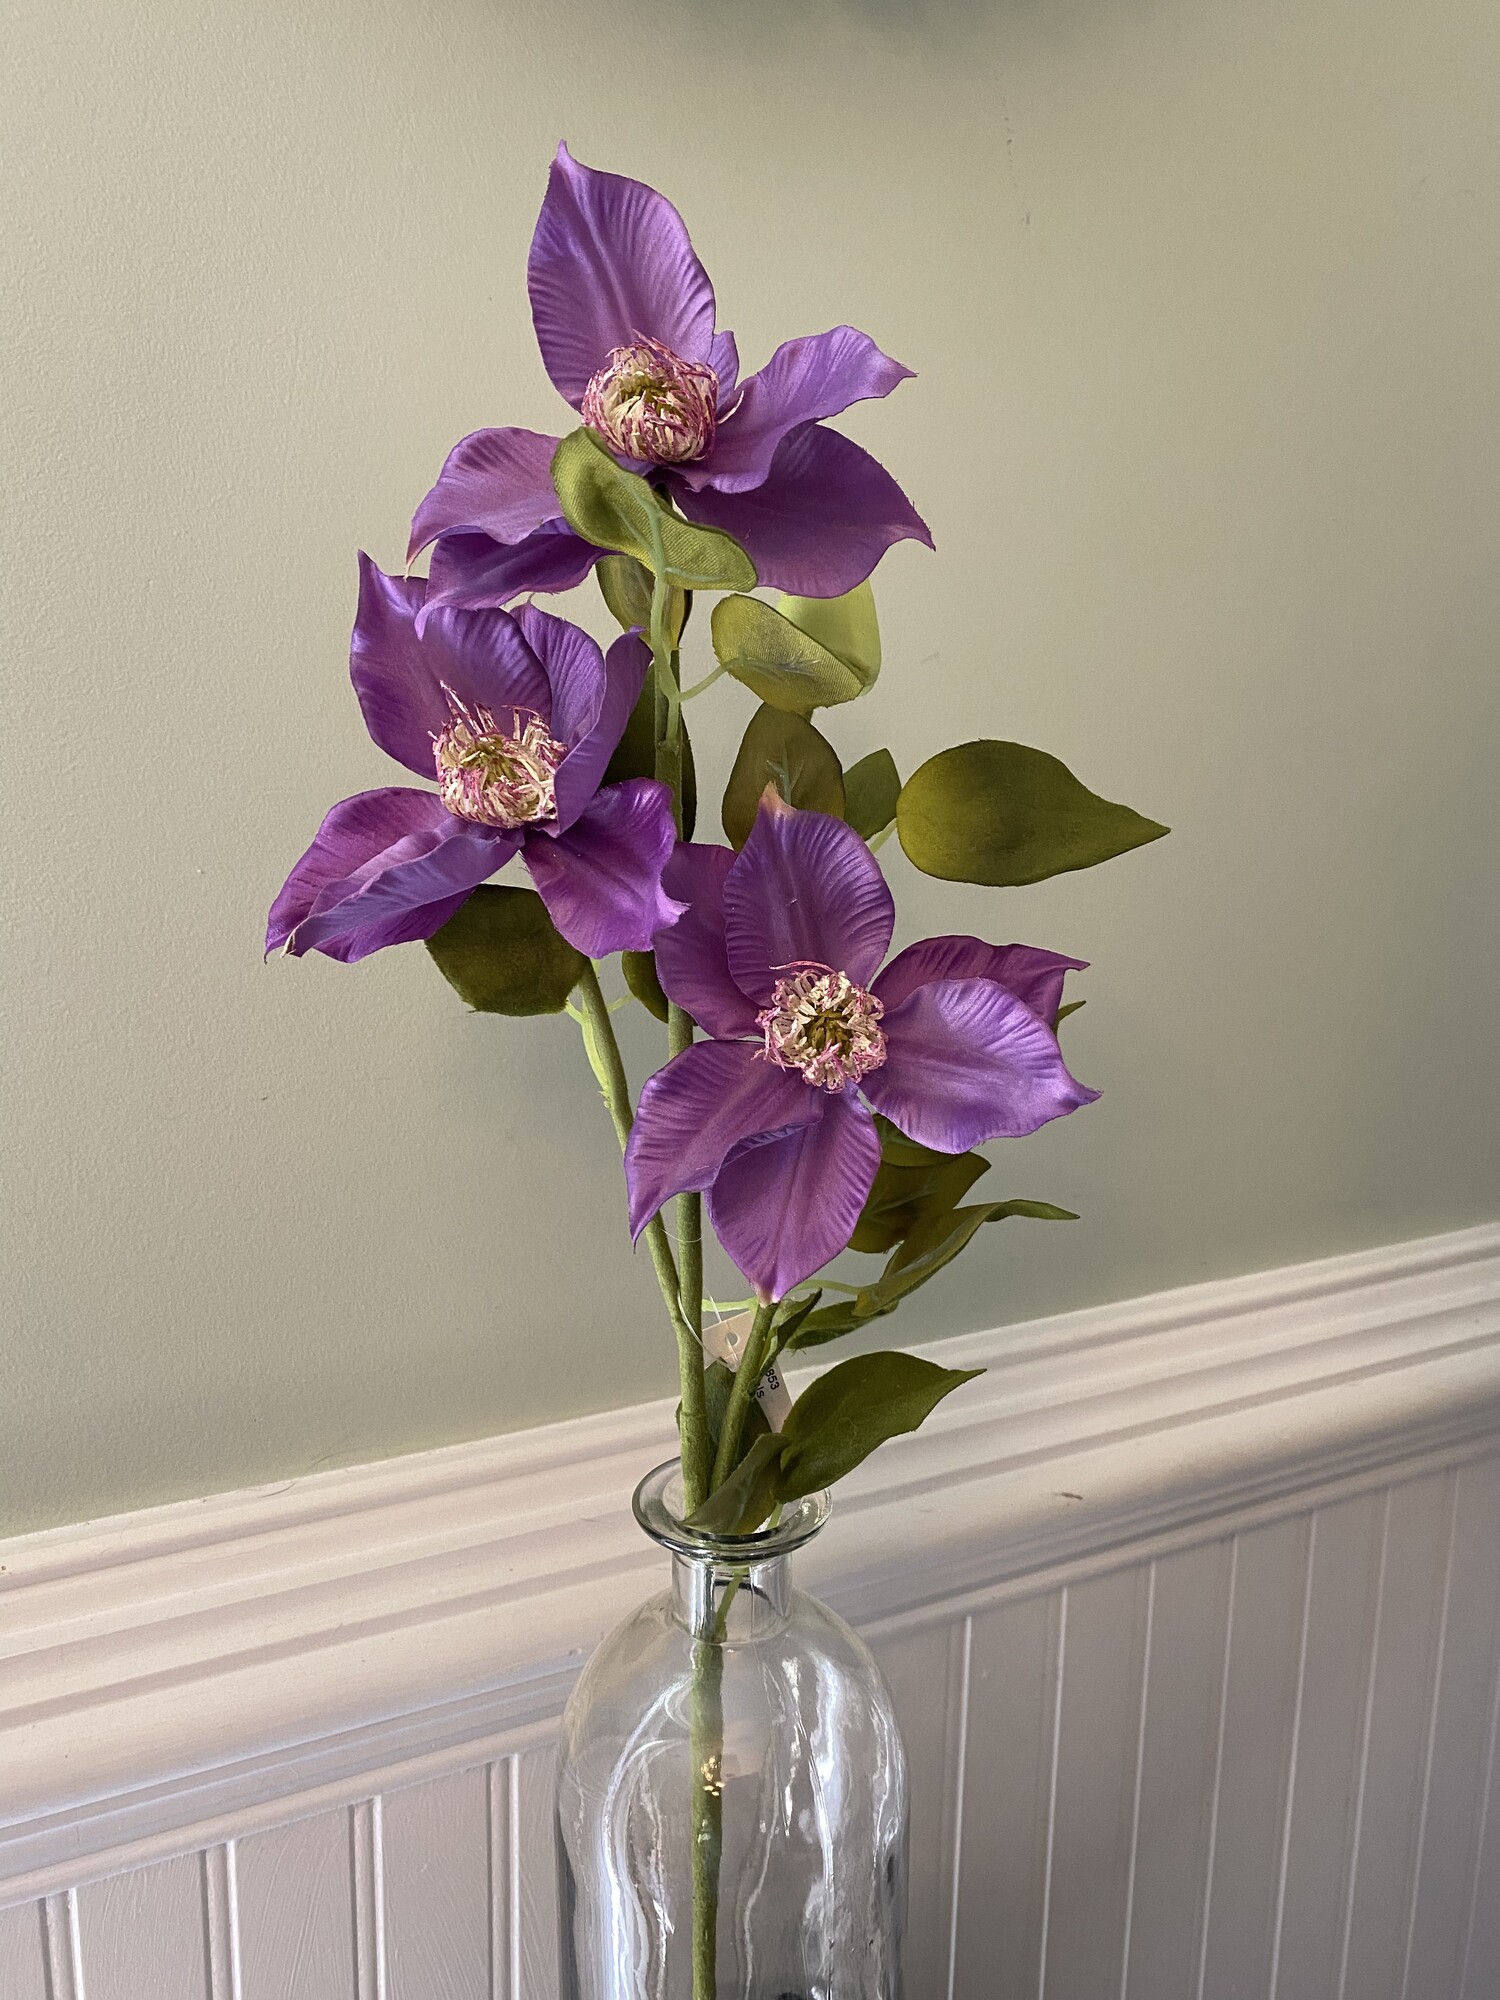 These lovely clematis stems measure 21 inches long and are made completely of fabrics to achieve a natural, real looking floral! The rich purple is such a beautiful pop of color for any space that needs brightening!